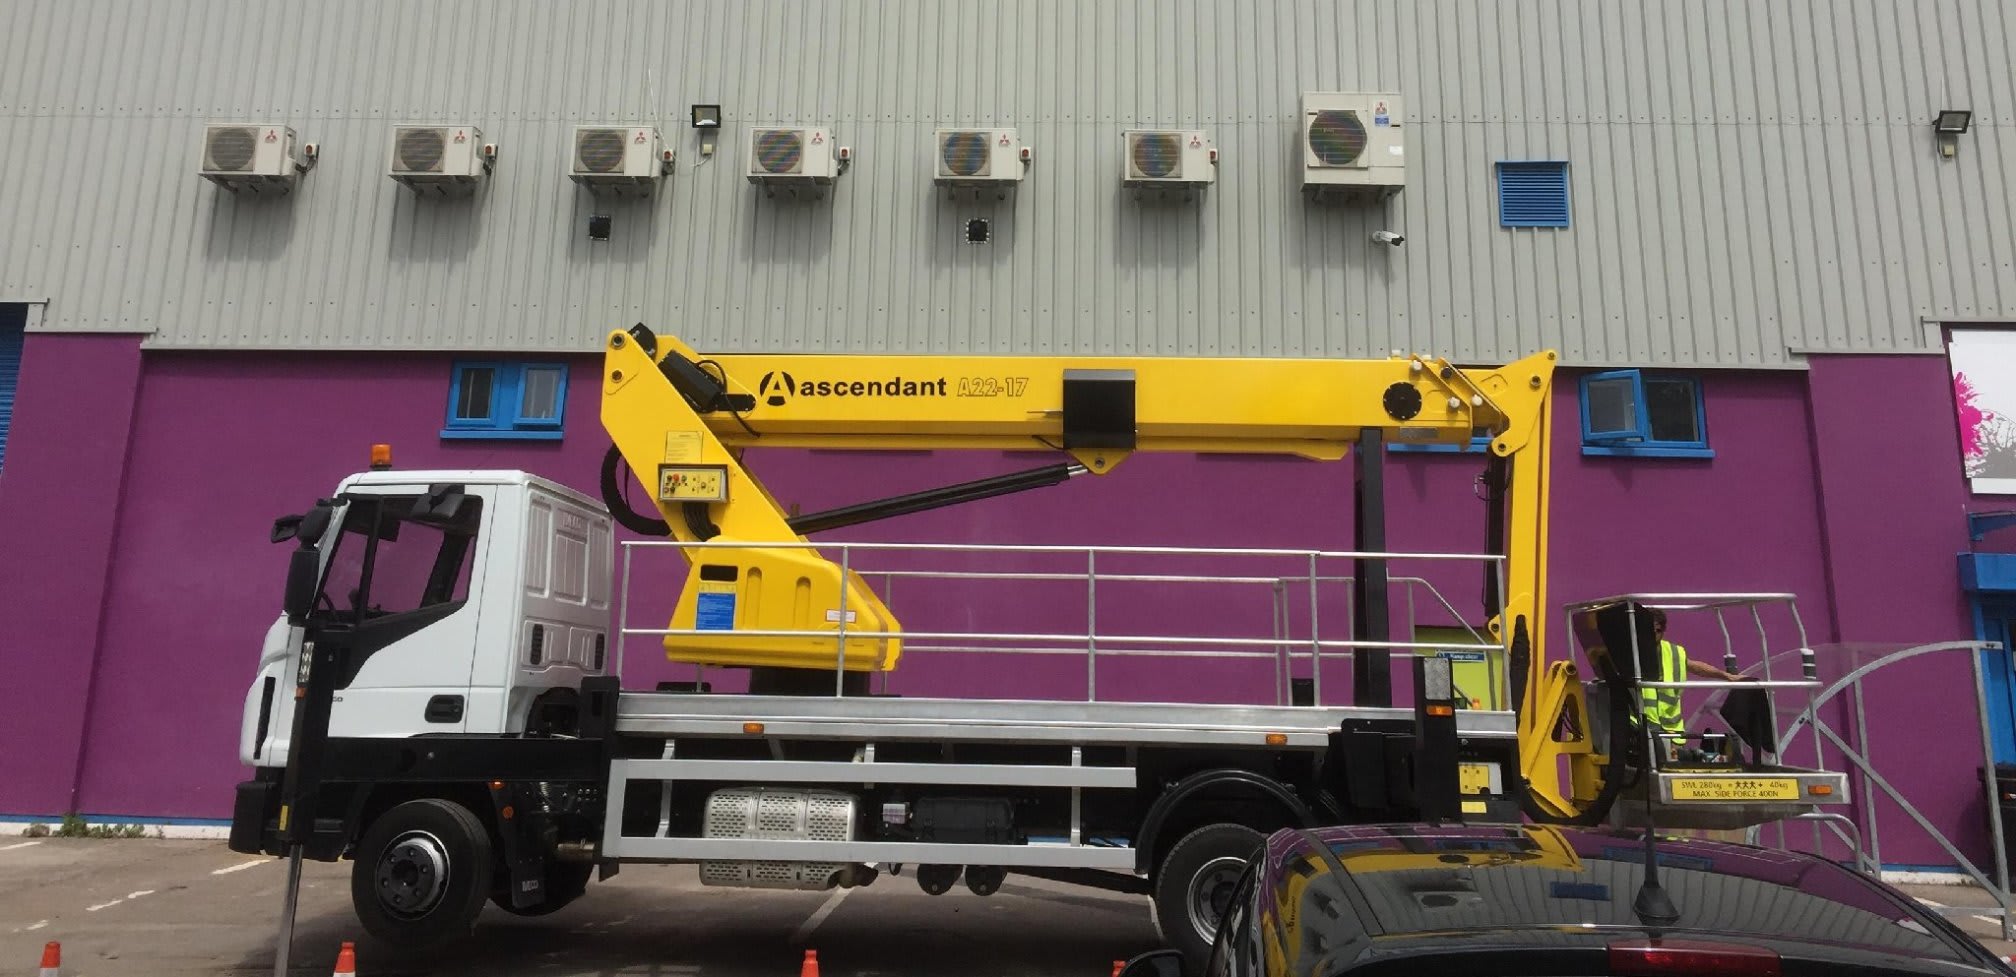 LIFT ME Cherry Picker Hire Crowthorne 01344 526570